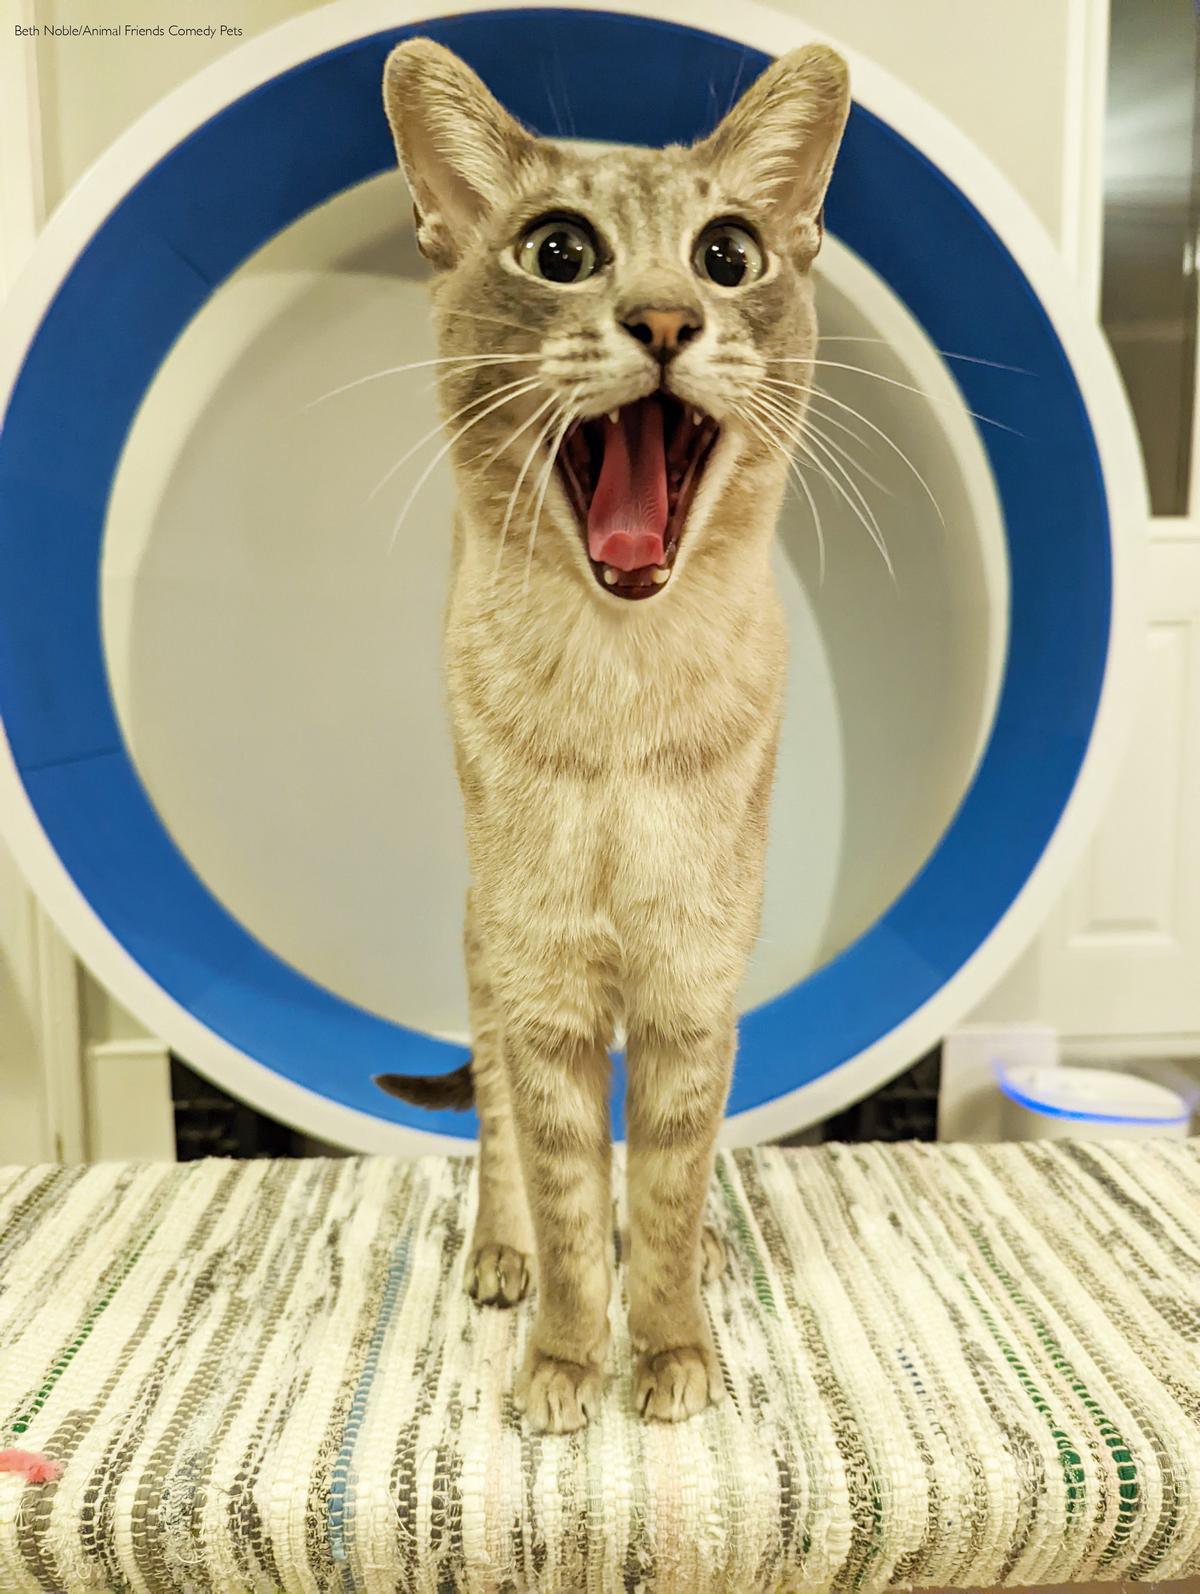 "CK shows his surprised face." (Courtesy of Beth Noble/<a href="https://www.facebook.com/AnimalFriendsPetInsurance">Animal Friends Comedy Pets</a>)